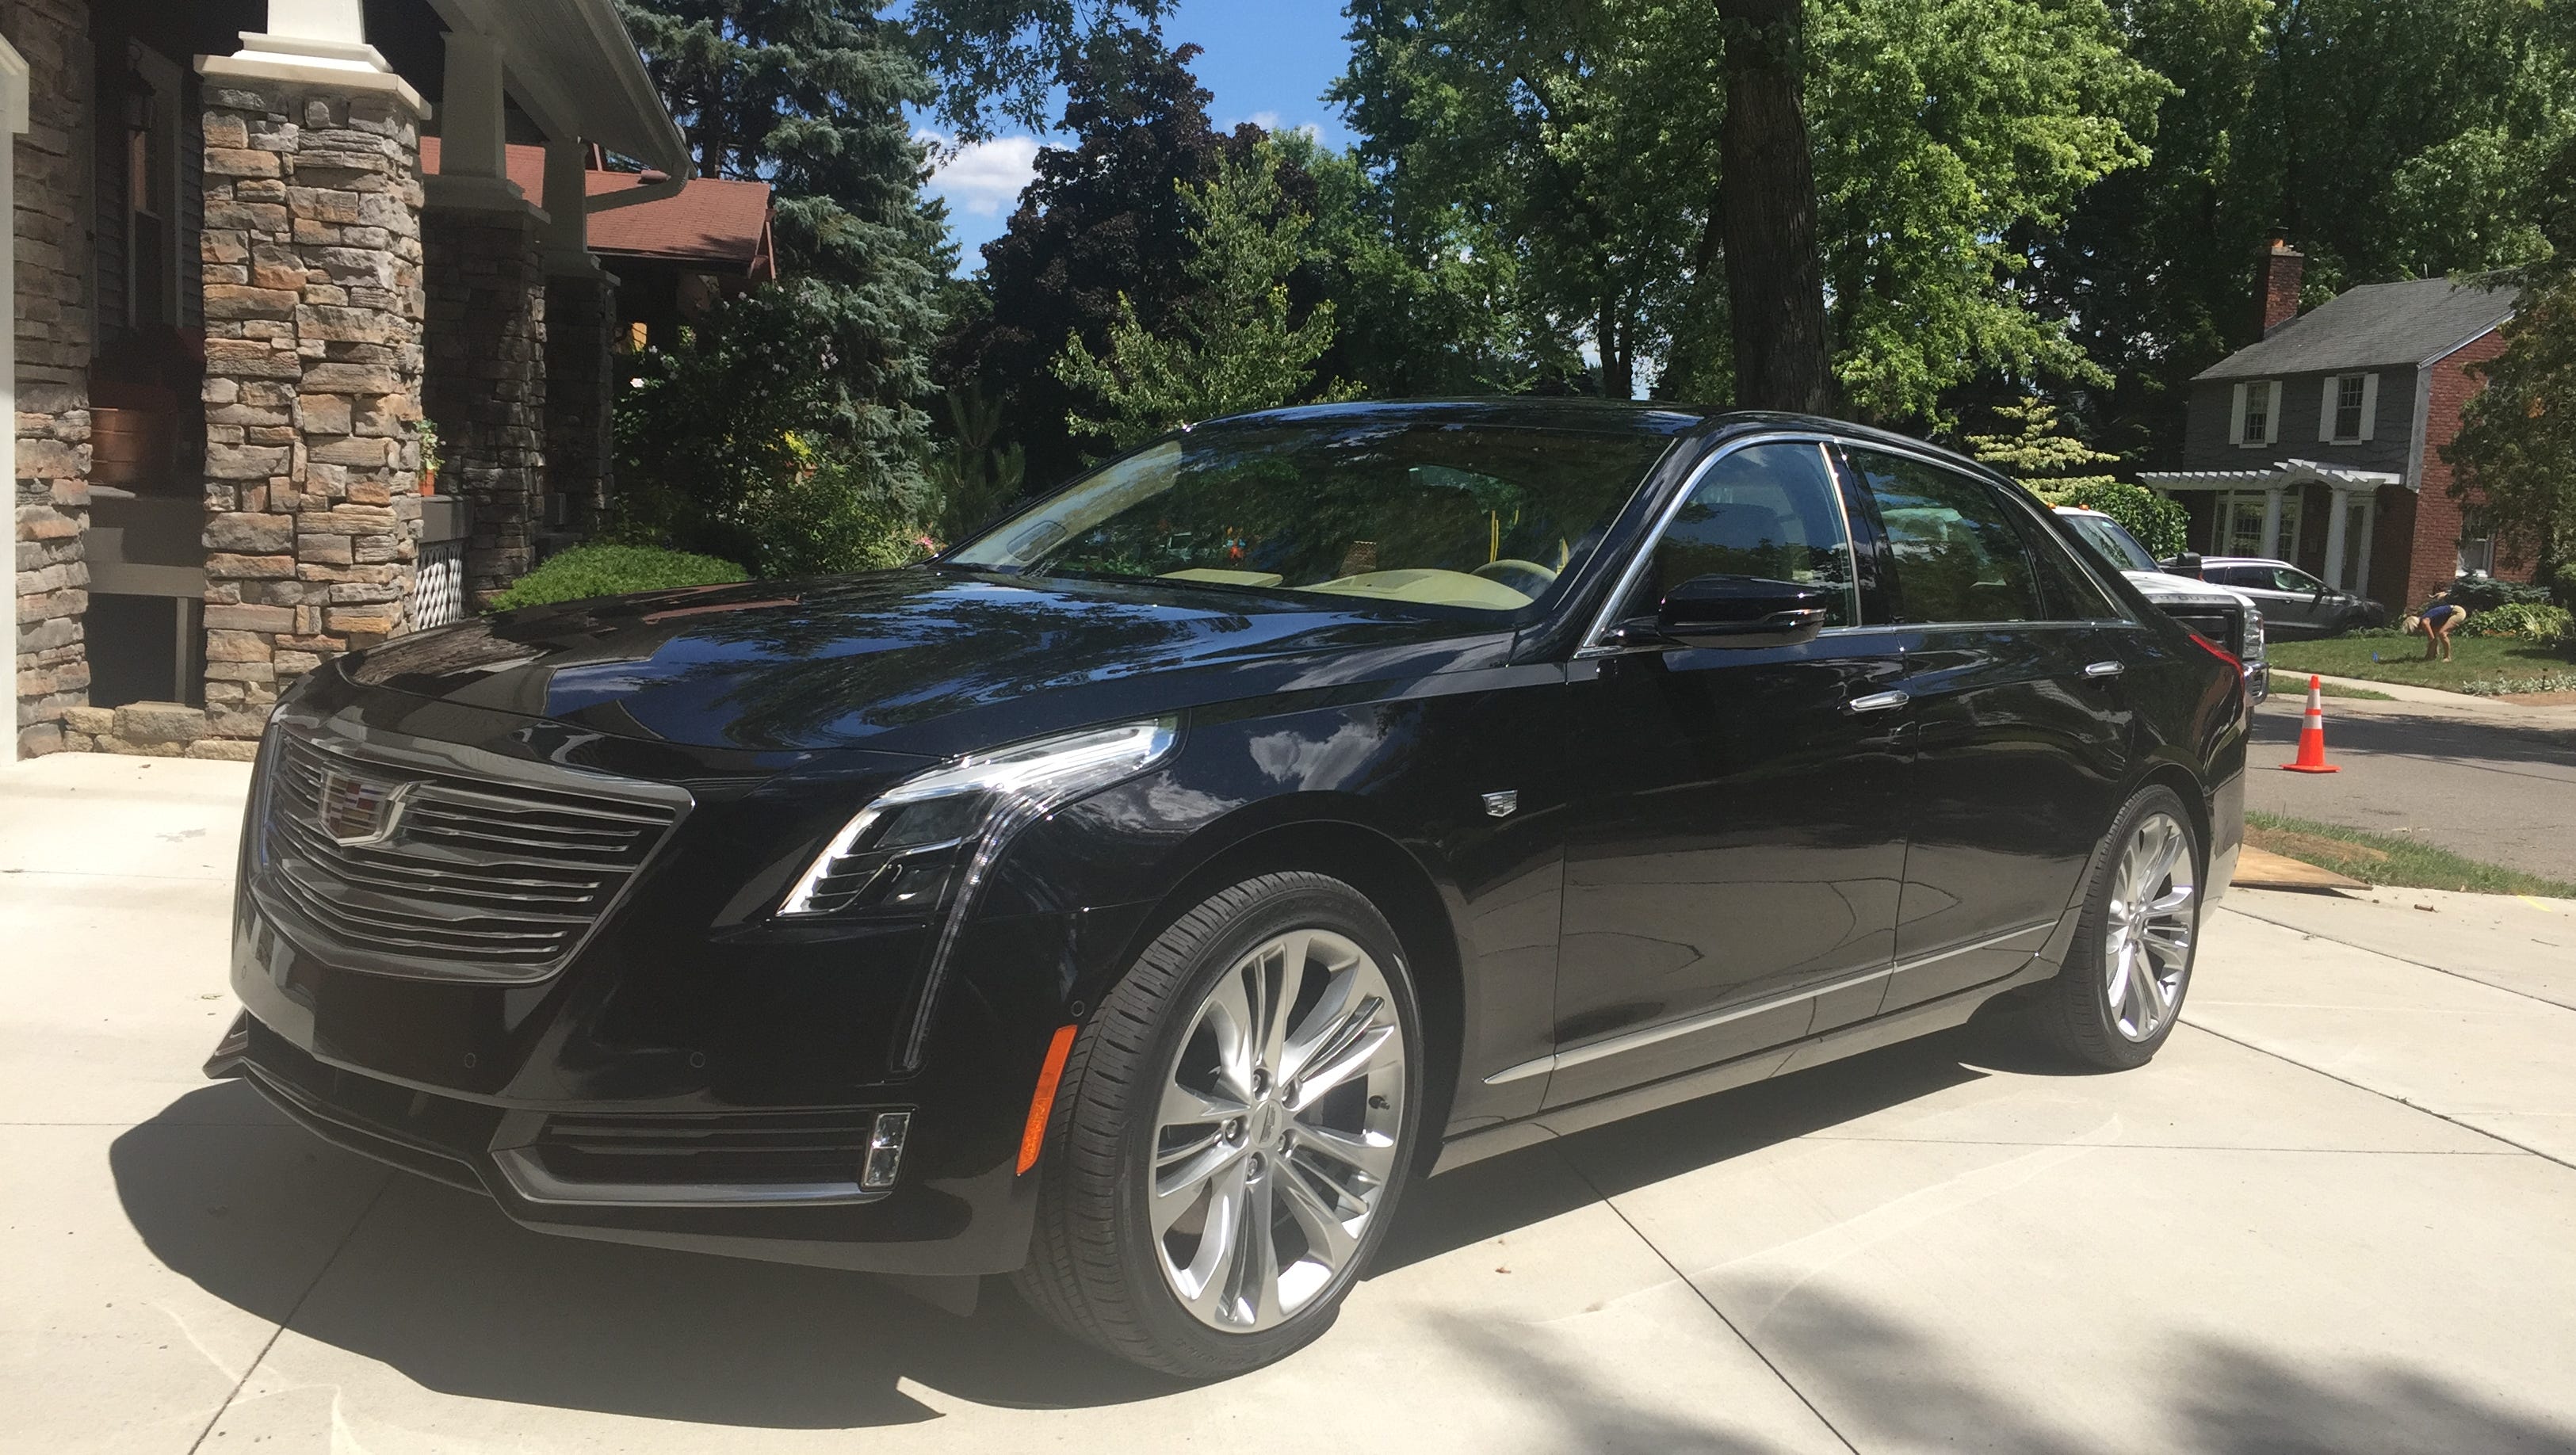 Review: Twin-turbo Cadillac CT6 runs with the big dogs